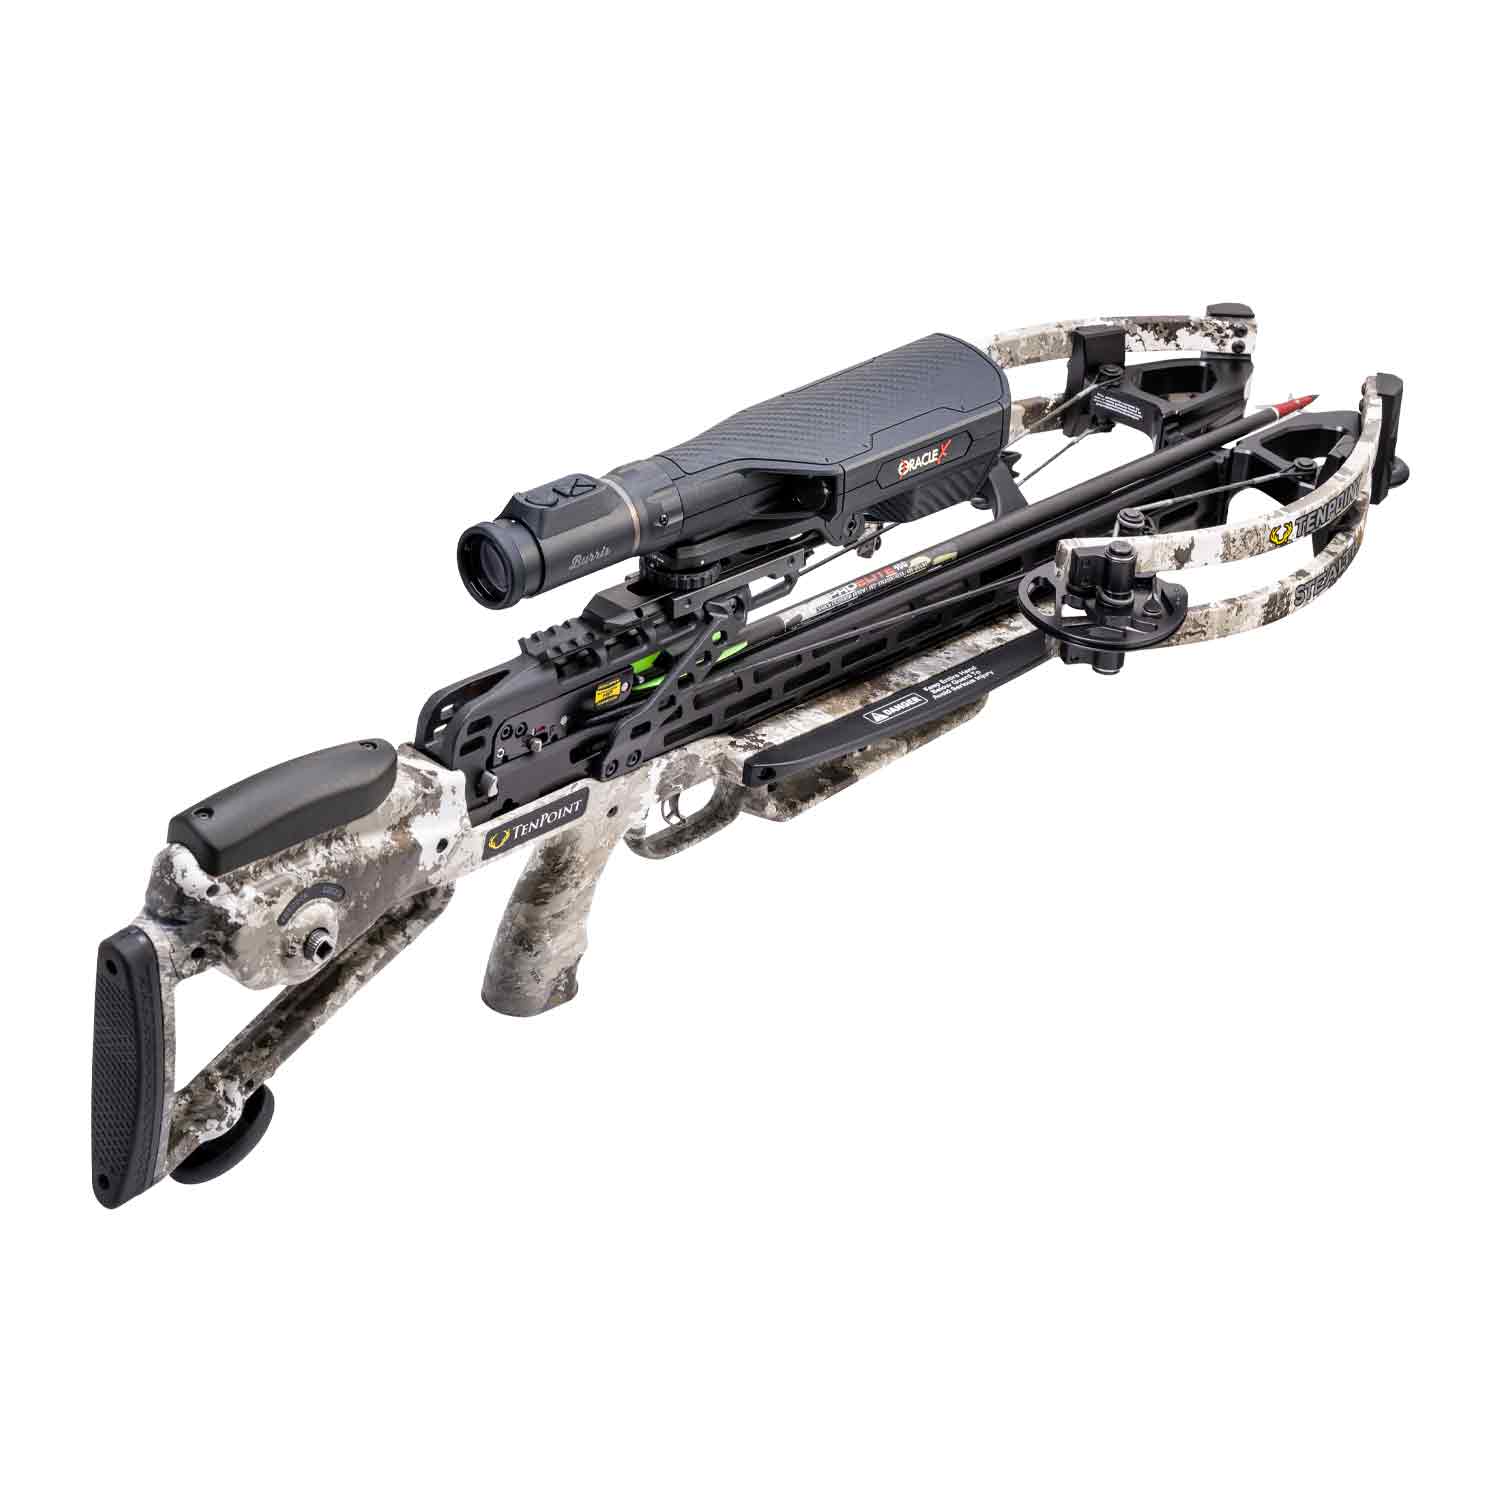 TenPoint Stealth 450 Crossbow Package (Burris Oracle Scope)